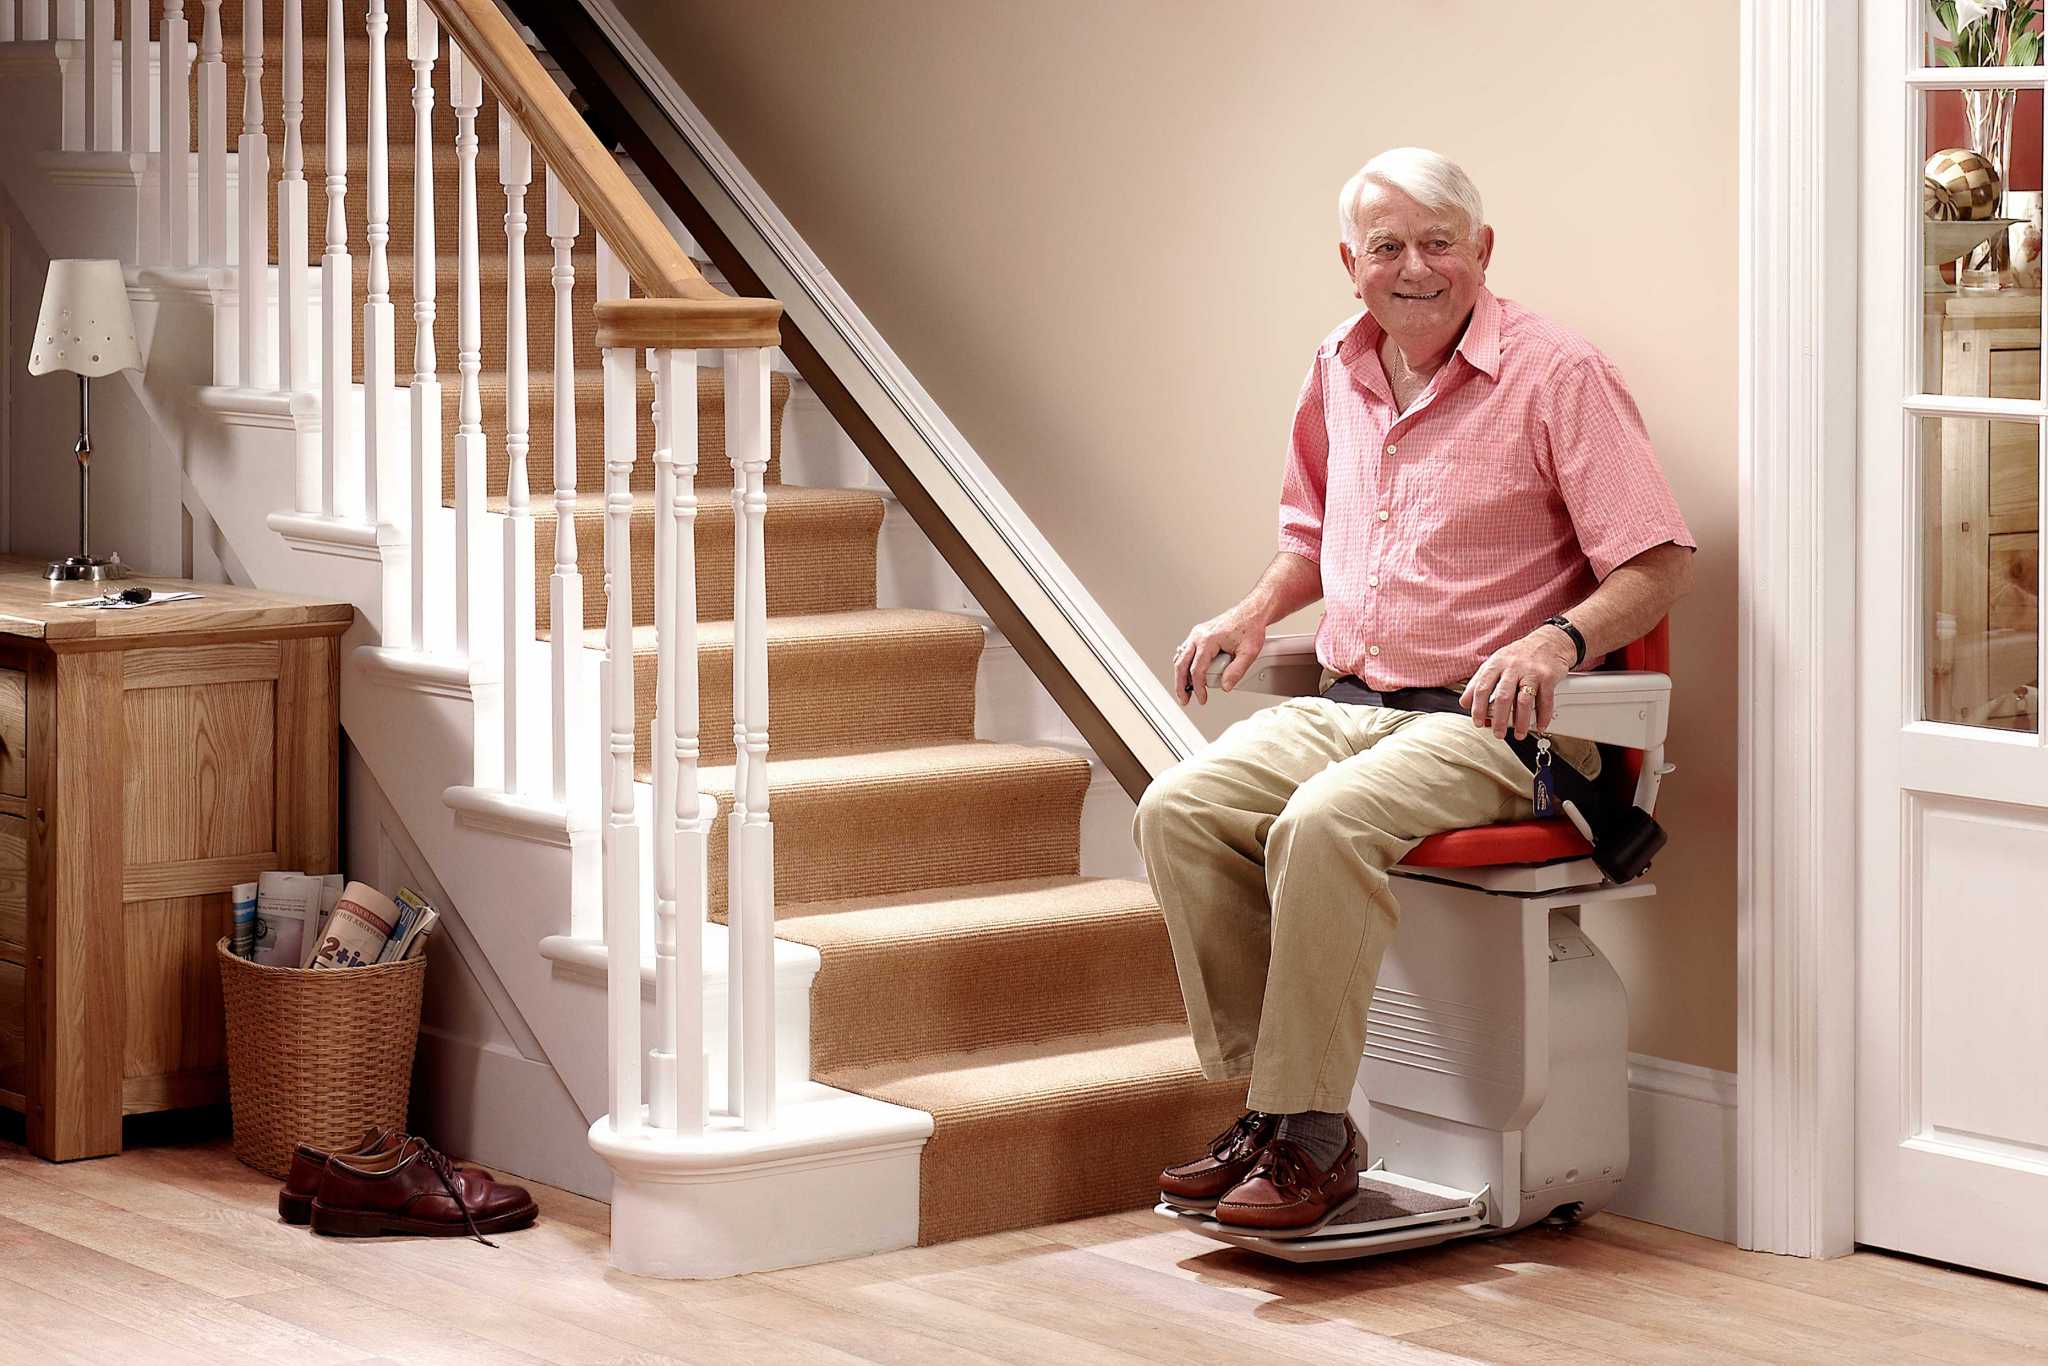 stairlift stairs man pros bungalow cons install move older bottom